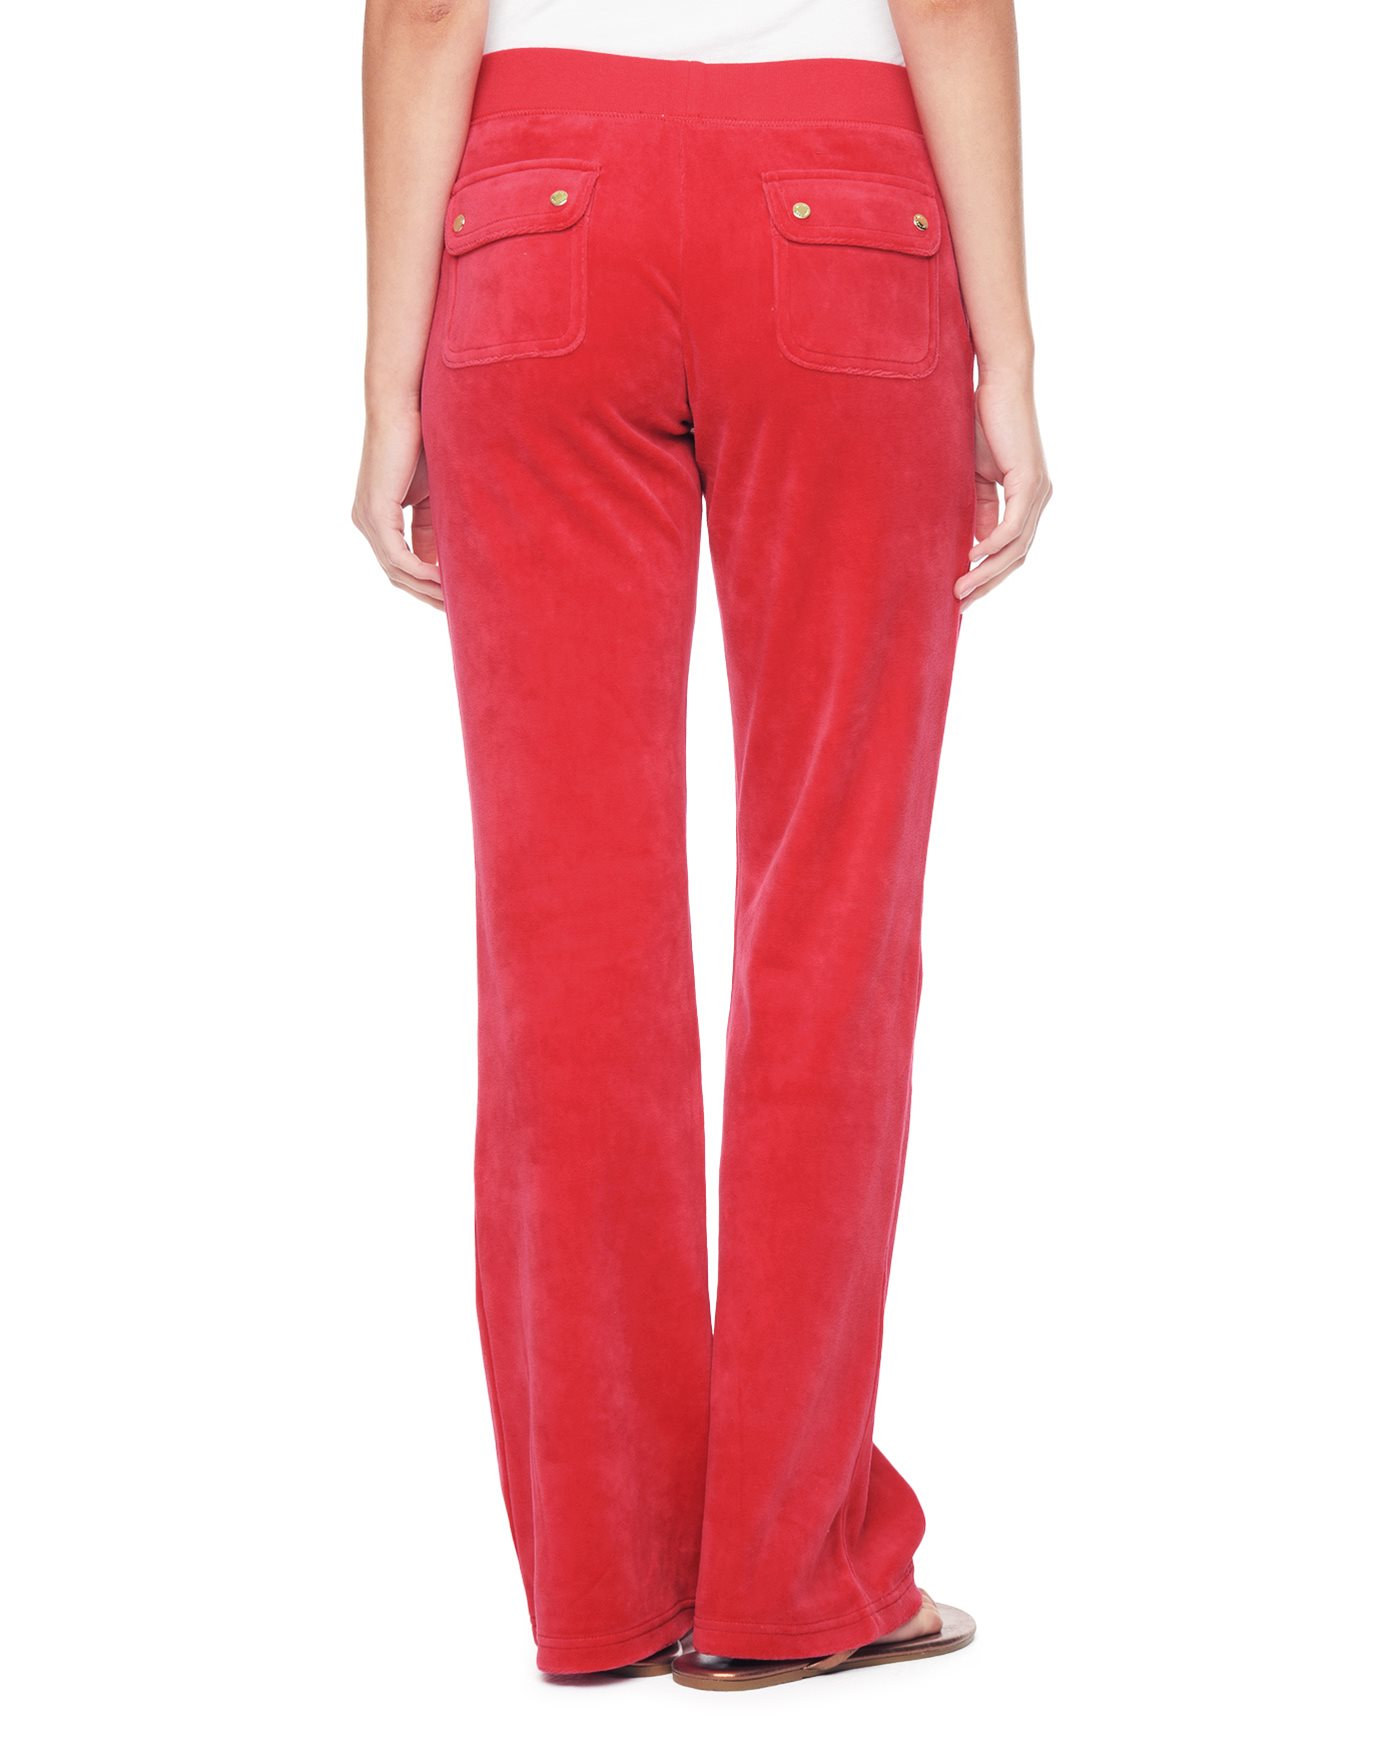 Juicy couture Bling Bootcut Velour Pant in Red | Lyst